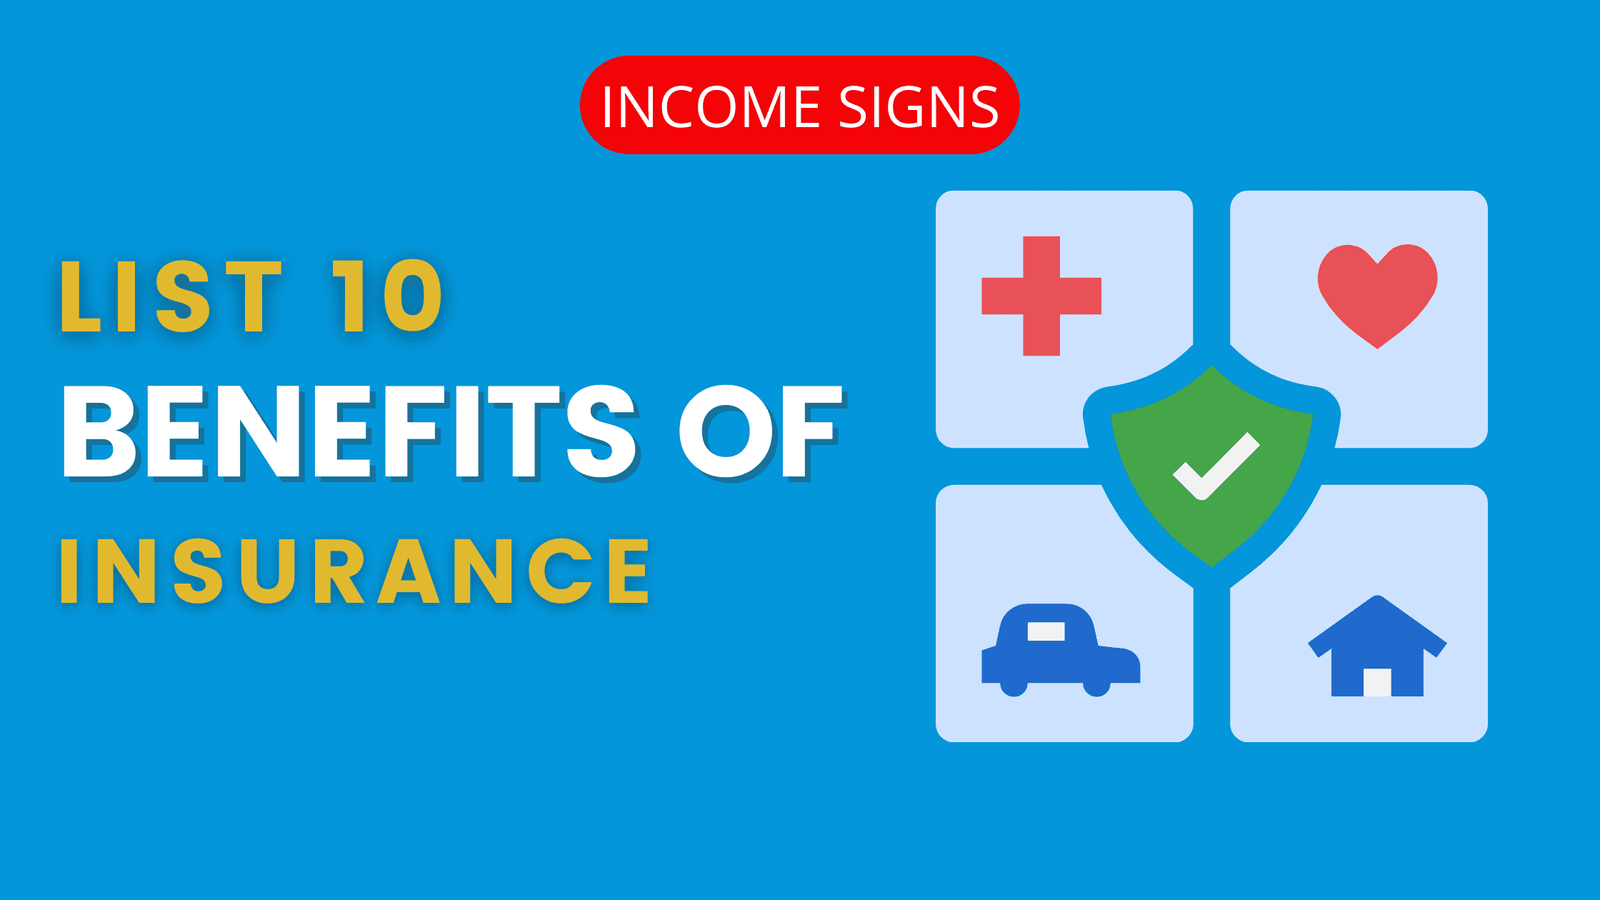 List 10 Benefit of Insurance – Must Check Out These